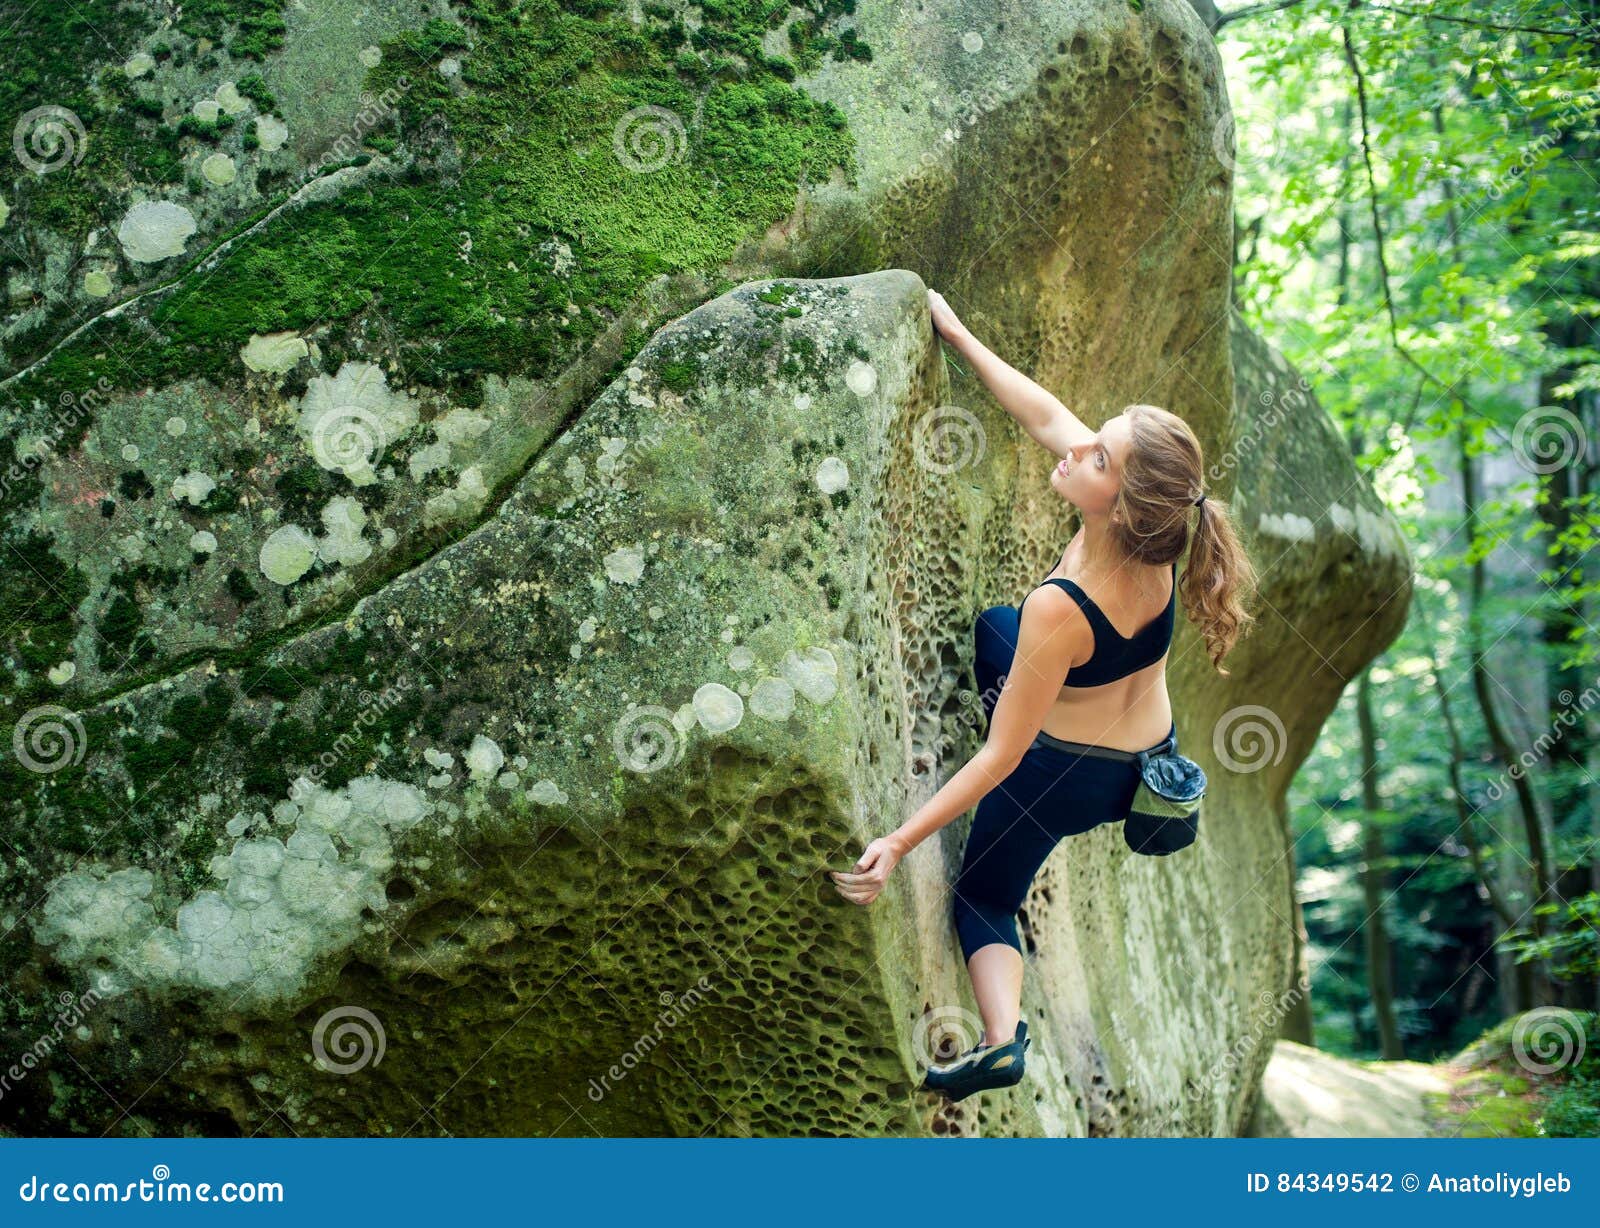 757 Woman Climbing Outfit Stock Photos - Free & Royalty-Free Stock Photos  from Dreamstime